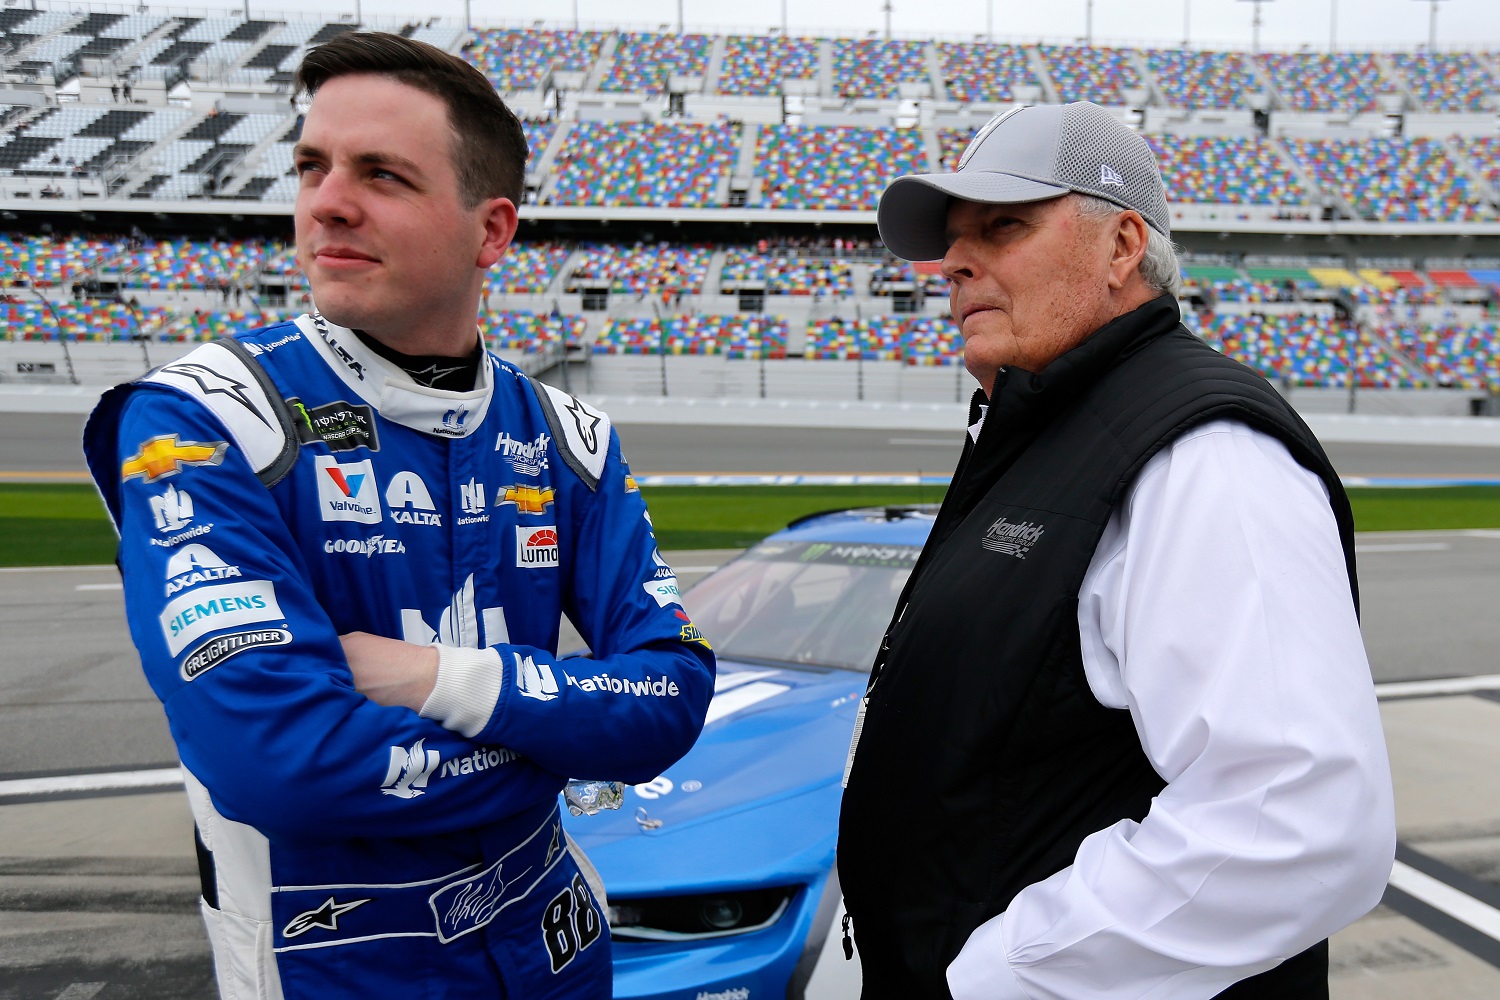 With job security through the 2023 season, Alex Bowman can focus on winning more races for Rick Hendrick in the No. 48 Ally Chevrolet. | Jonathan Ferrey/Getty Images